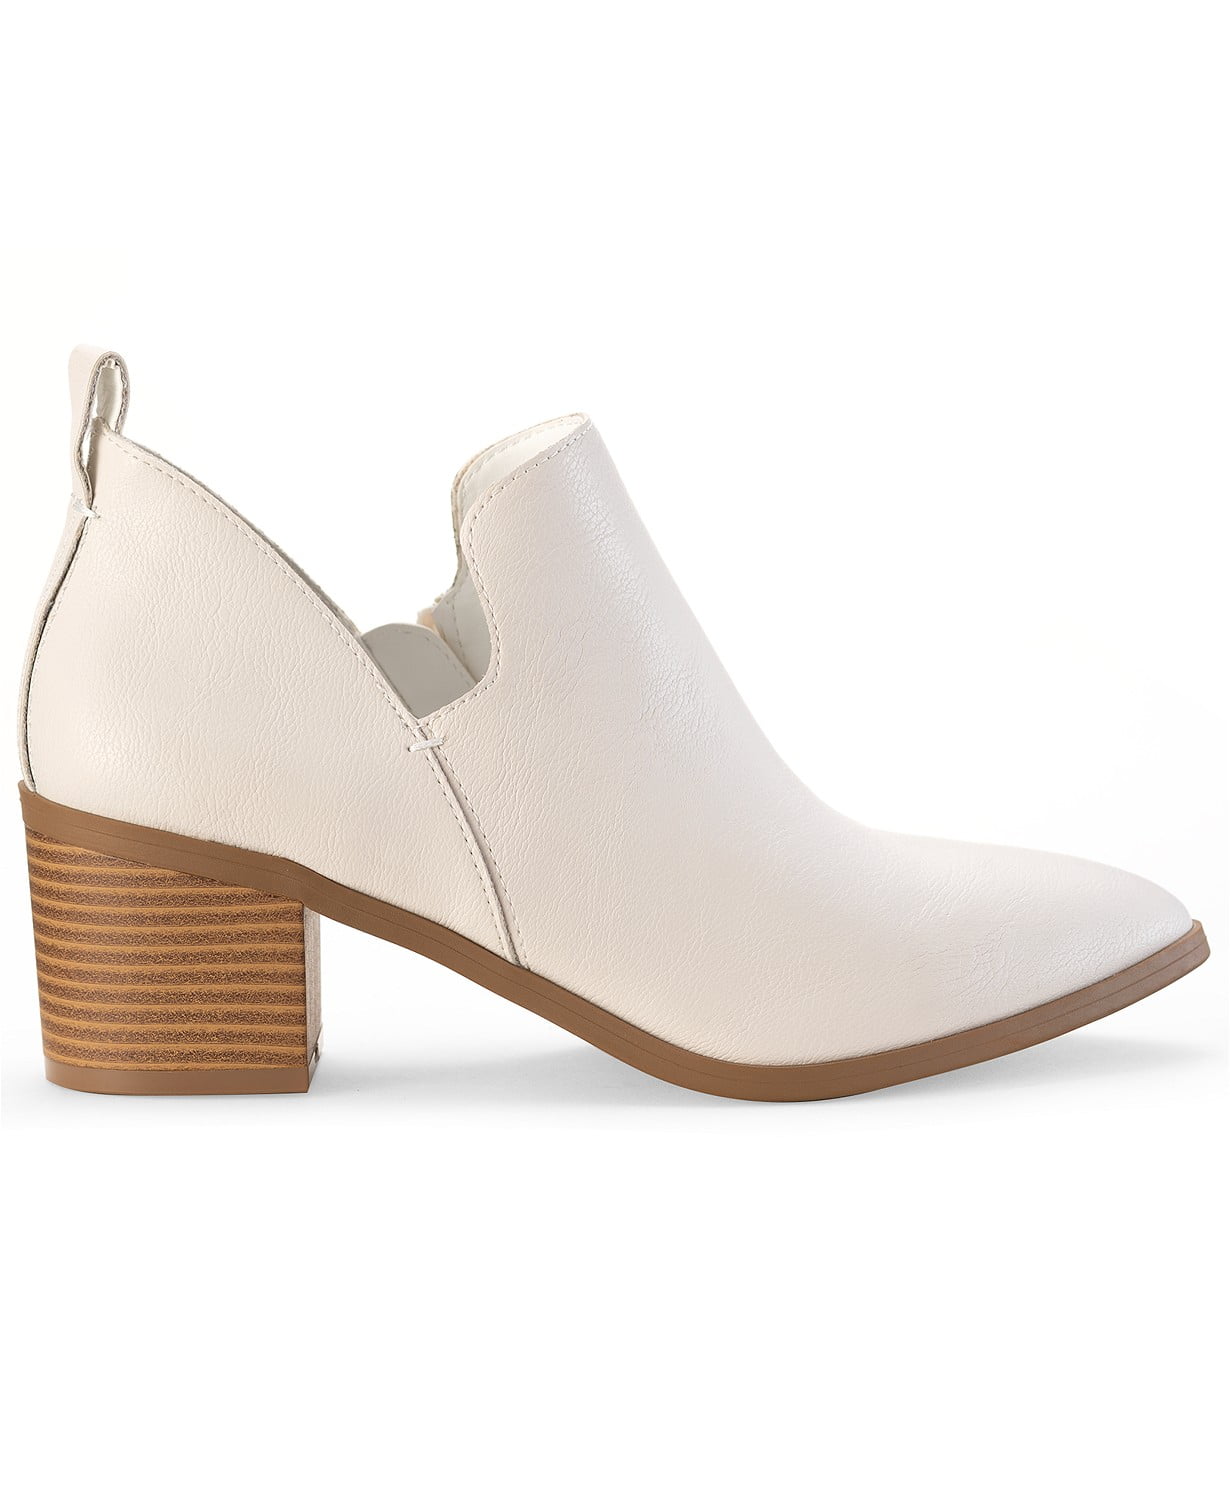 www.couturepoint.com-sun-stone-womens-off-white-yuni-booties